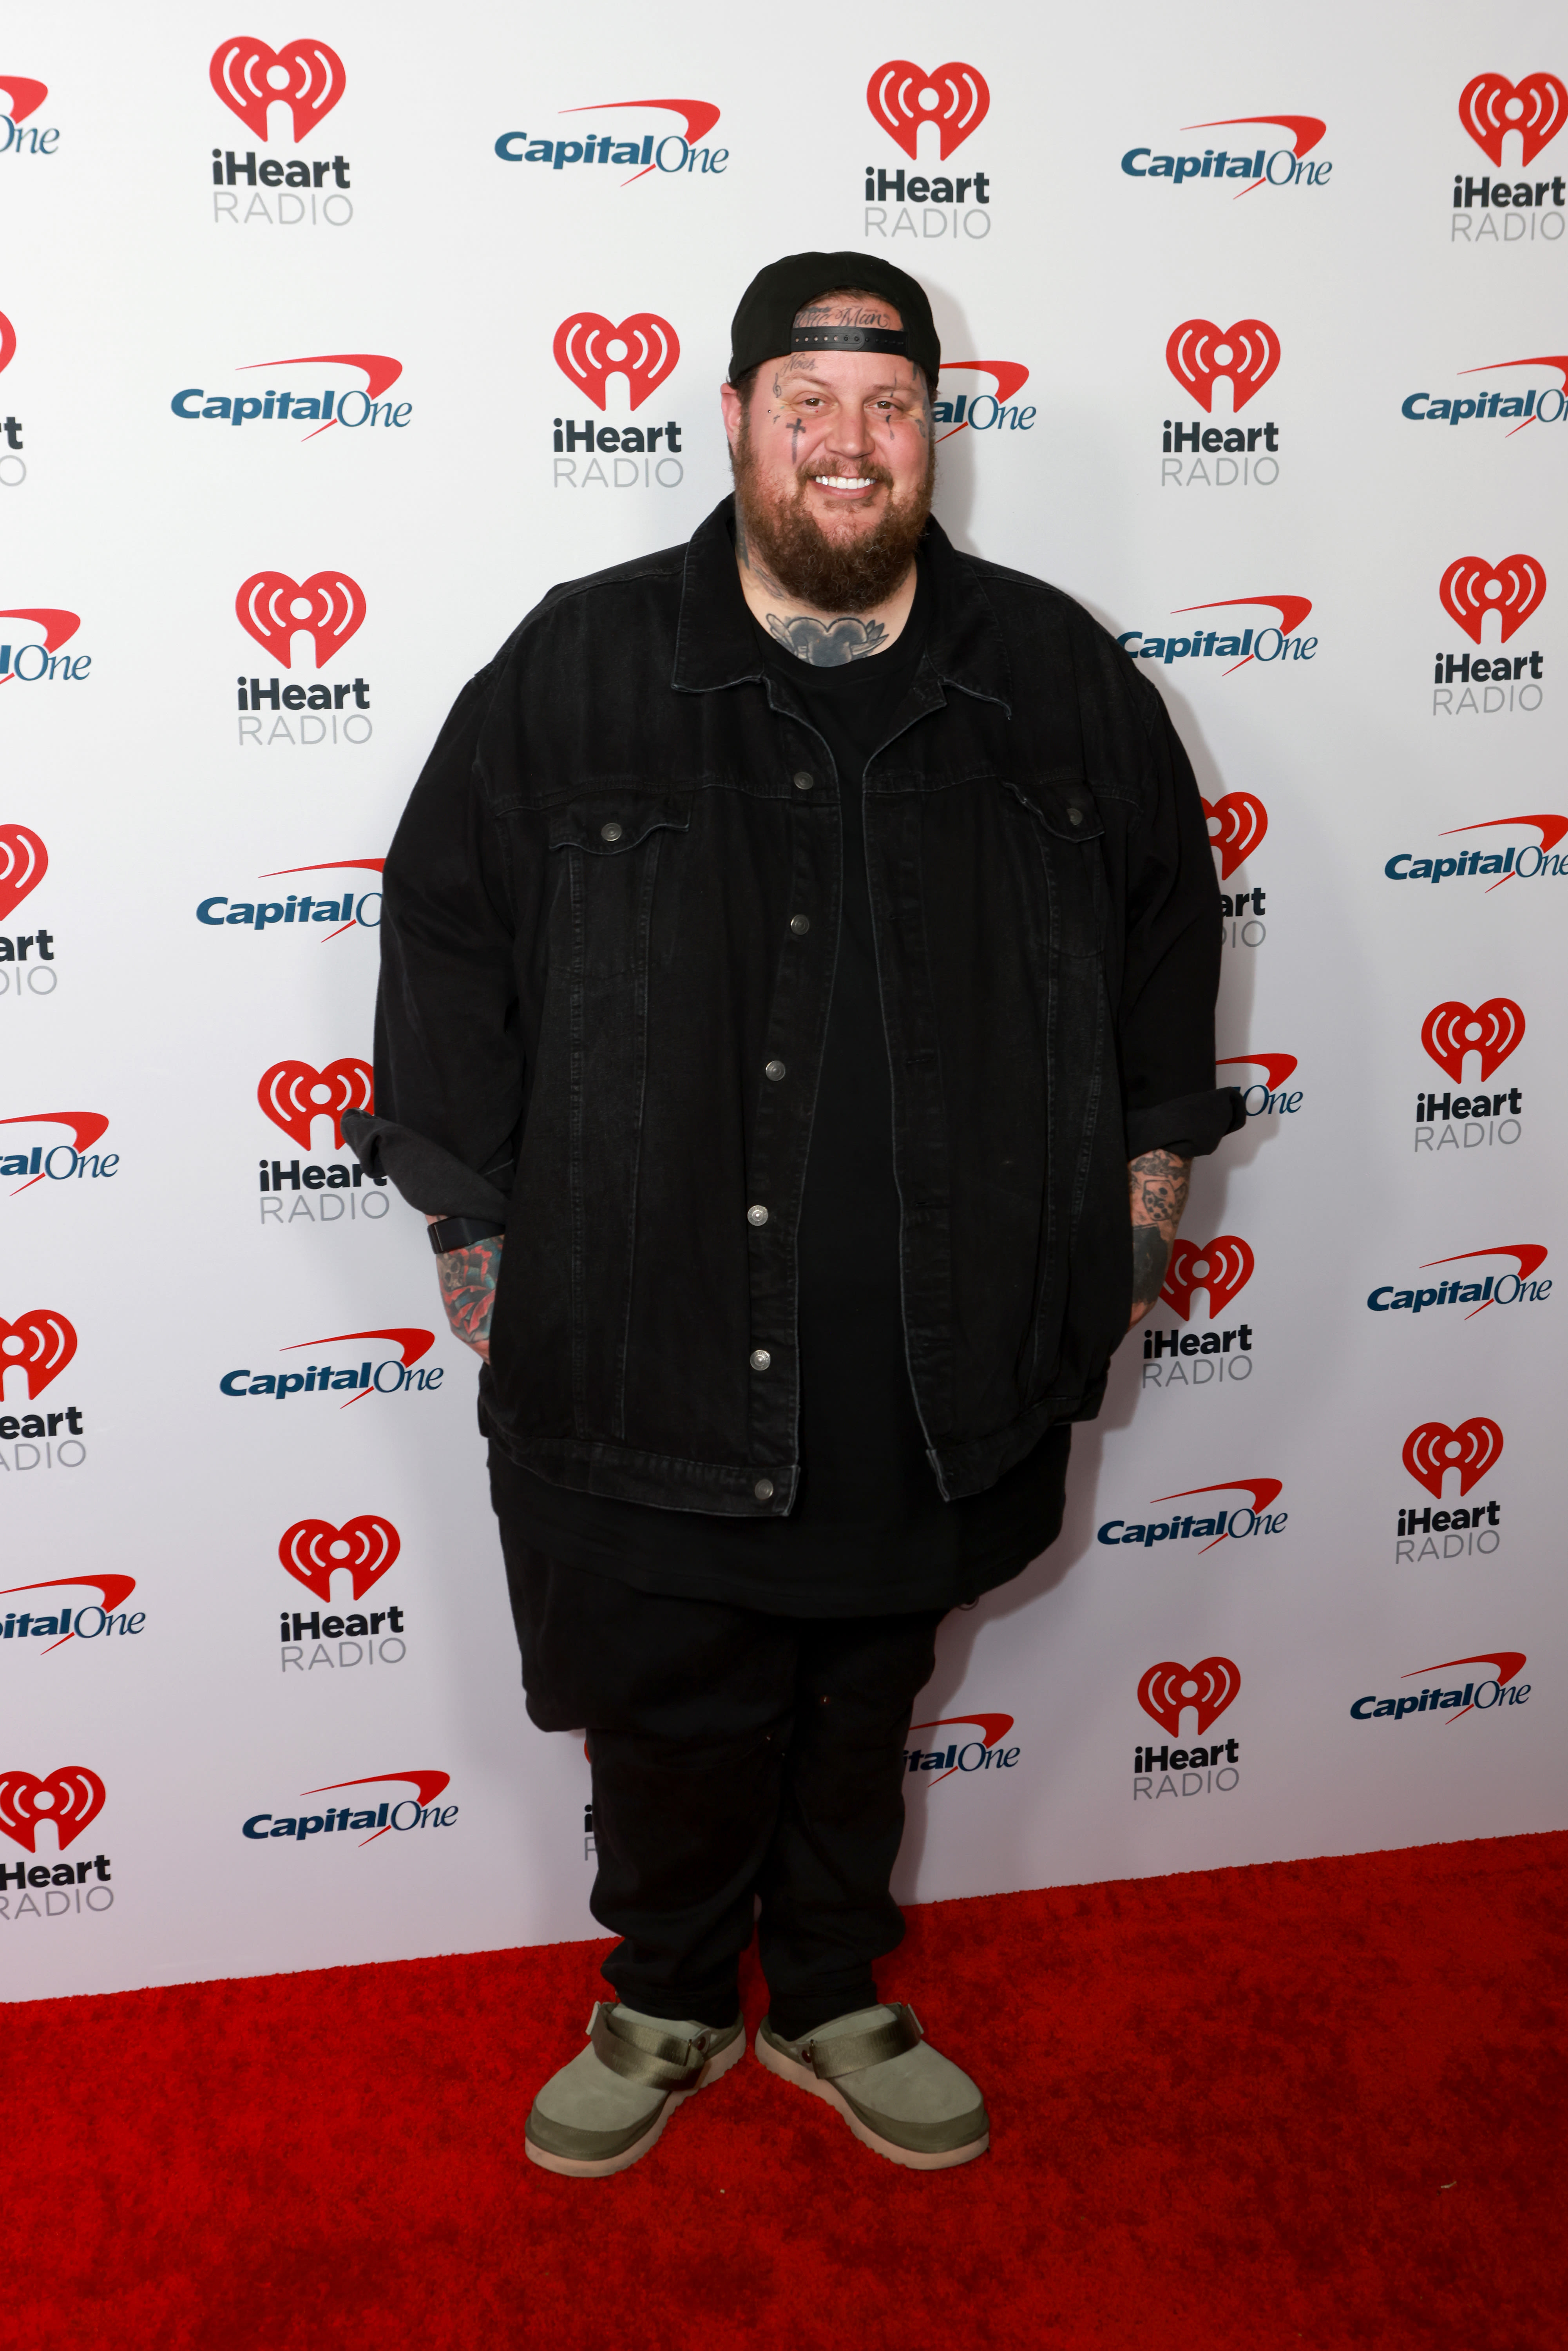 Jelly Roll’s Inspiring Weight-Loss Goals: He’s ‘Determined to Get Down Below 300’